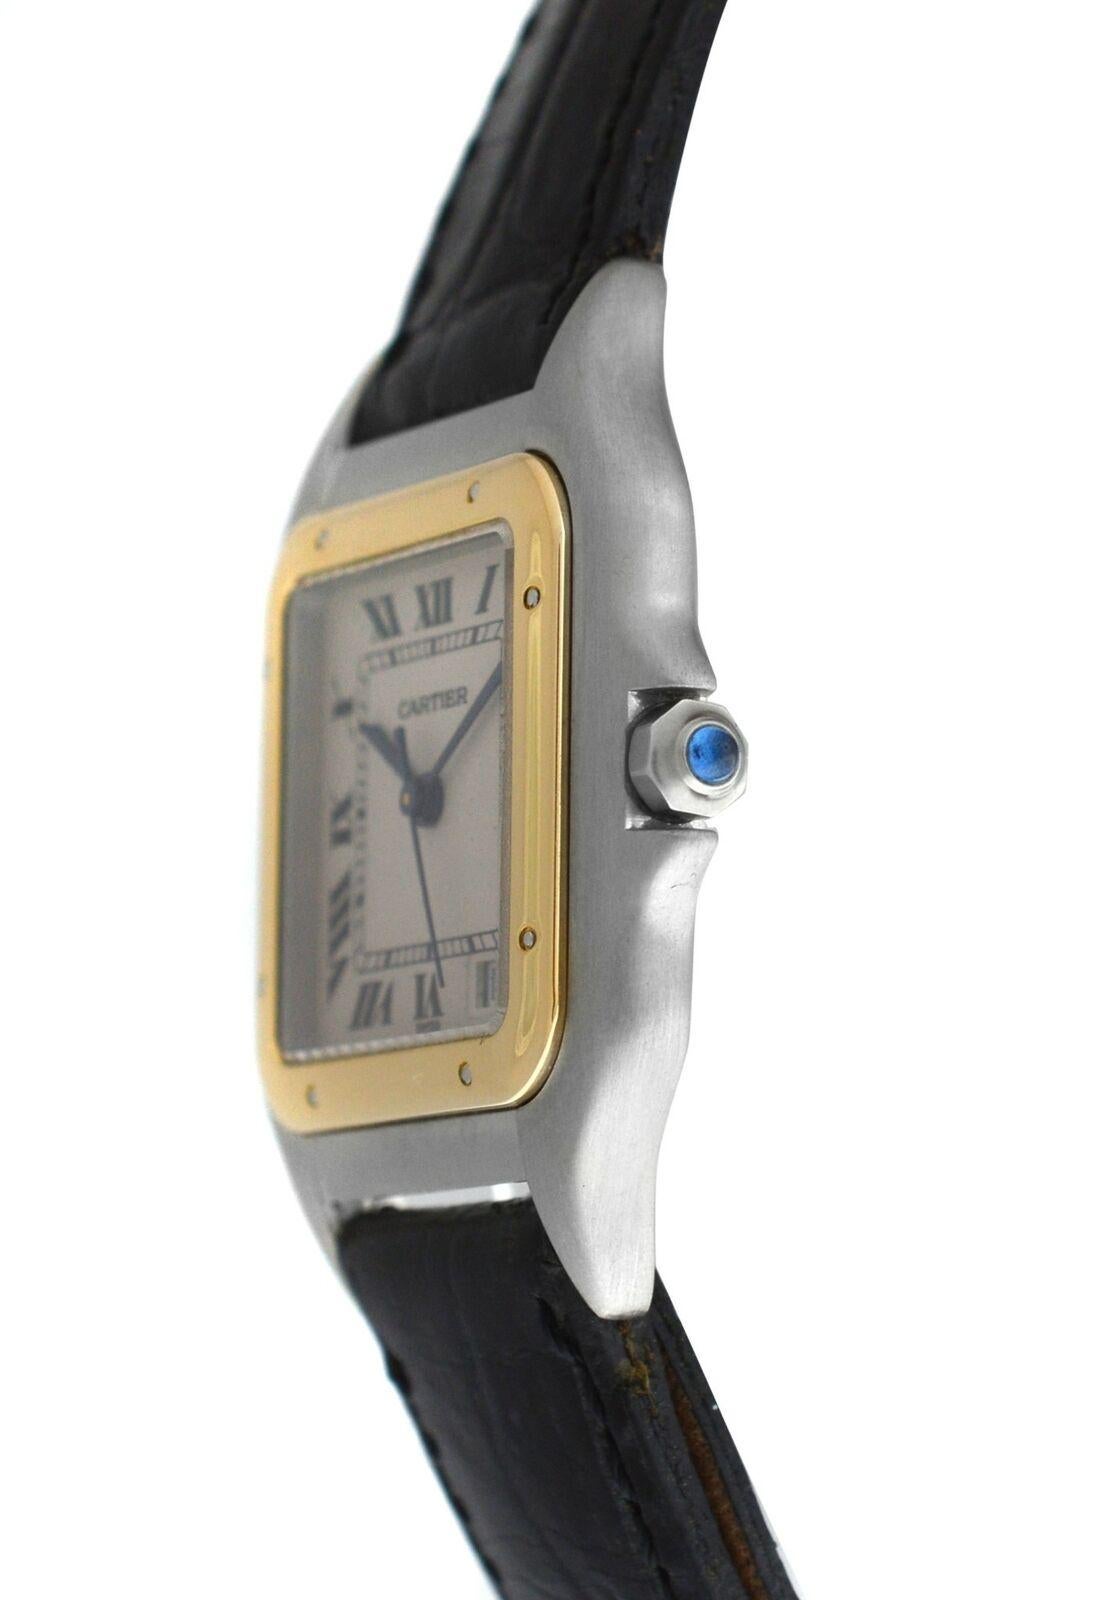 Brand	Cartier
Model	Panthere 1100
Gender	Ladies
Condition	Pre-owned
Movement	Swiss Quartz
Case Material	Stainless Steel & 18K Yellow Gold
Bracelet / Strap Material	
Genuine leather

Clasp / Buckle Material	
Stainless Steel 

Clasp